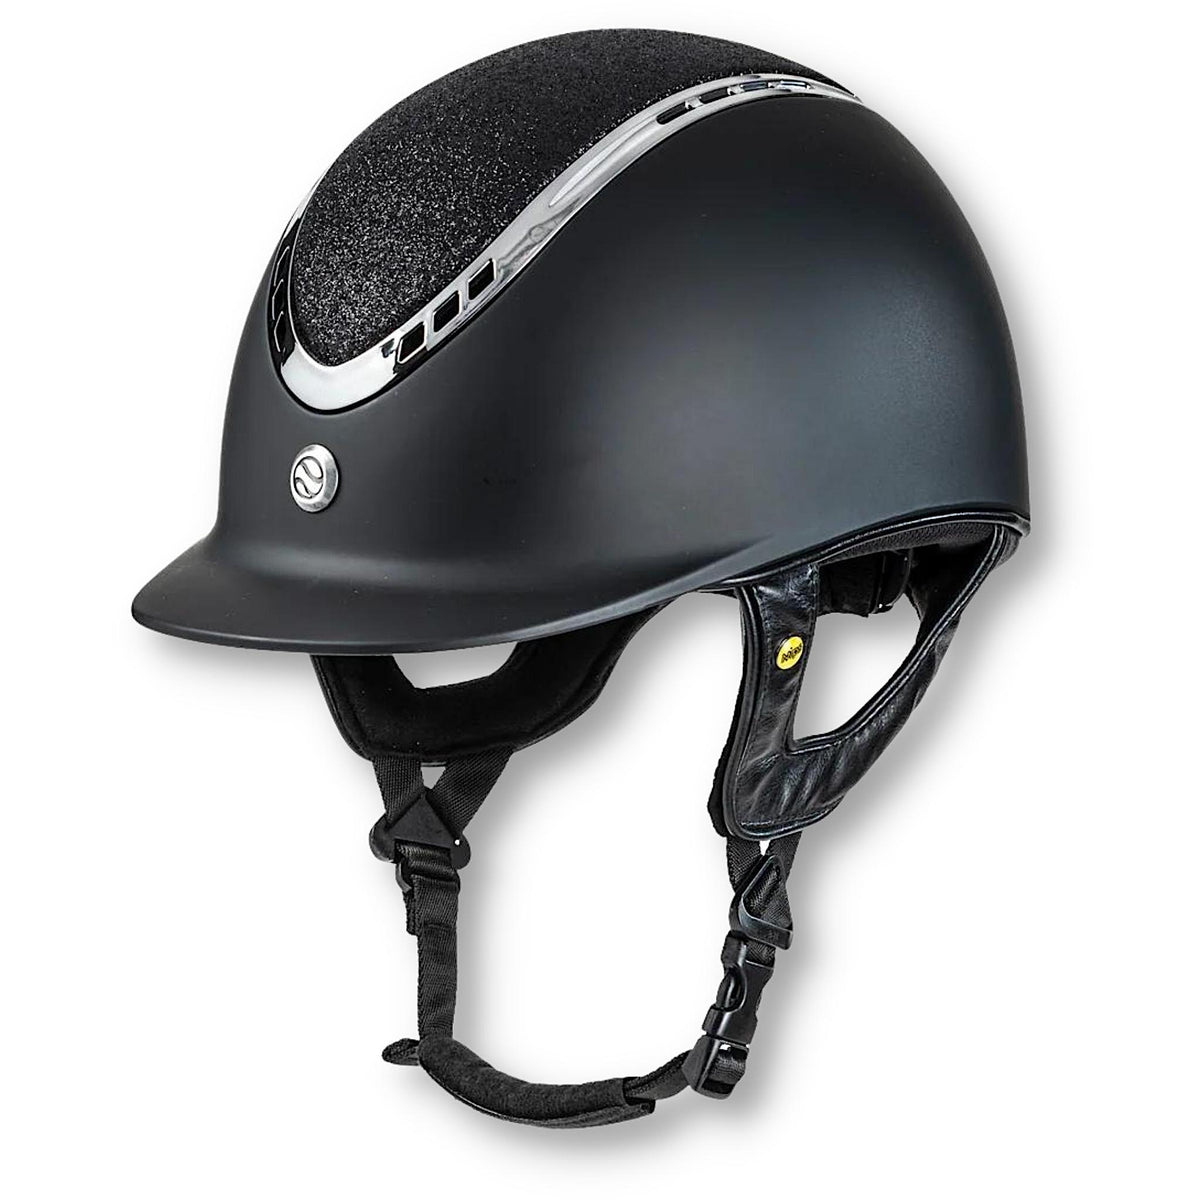 Smooth finish black helmet with black glitter on top and silver details.